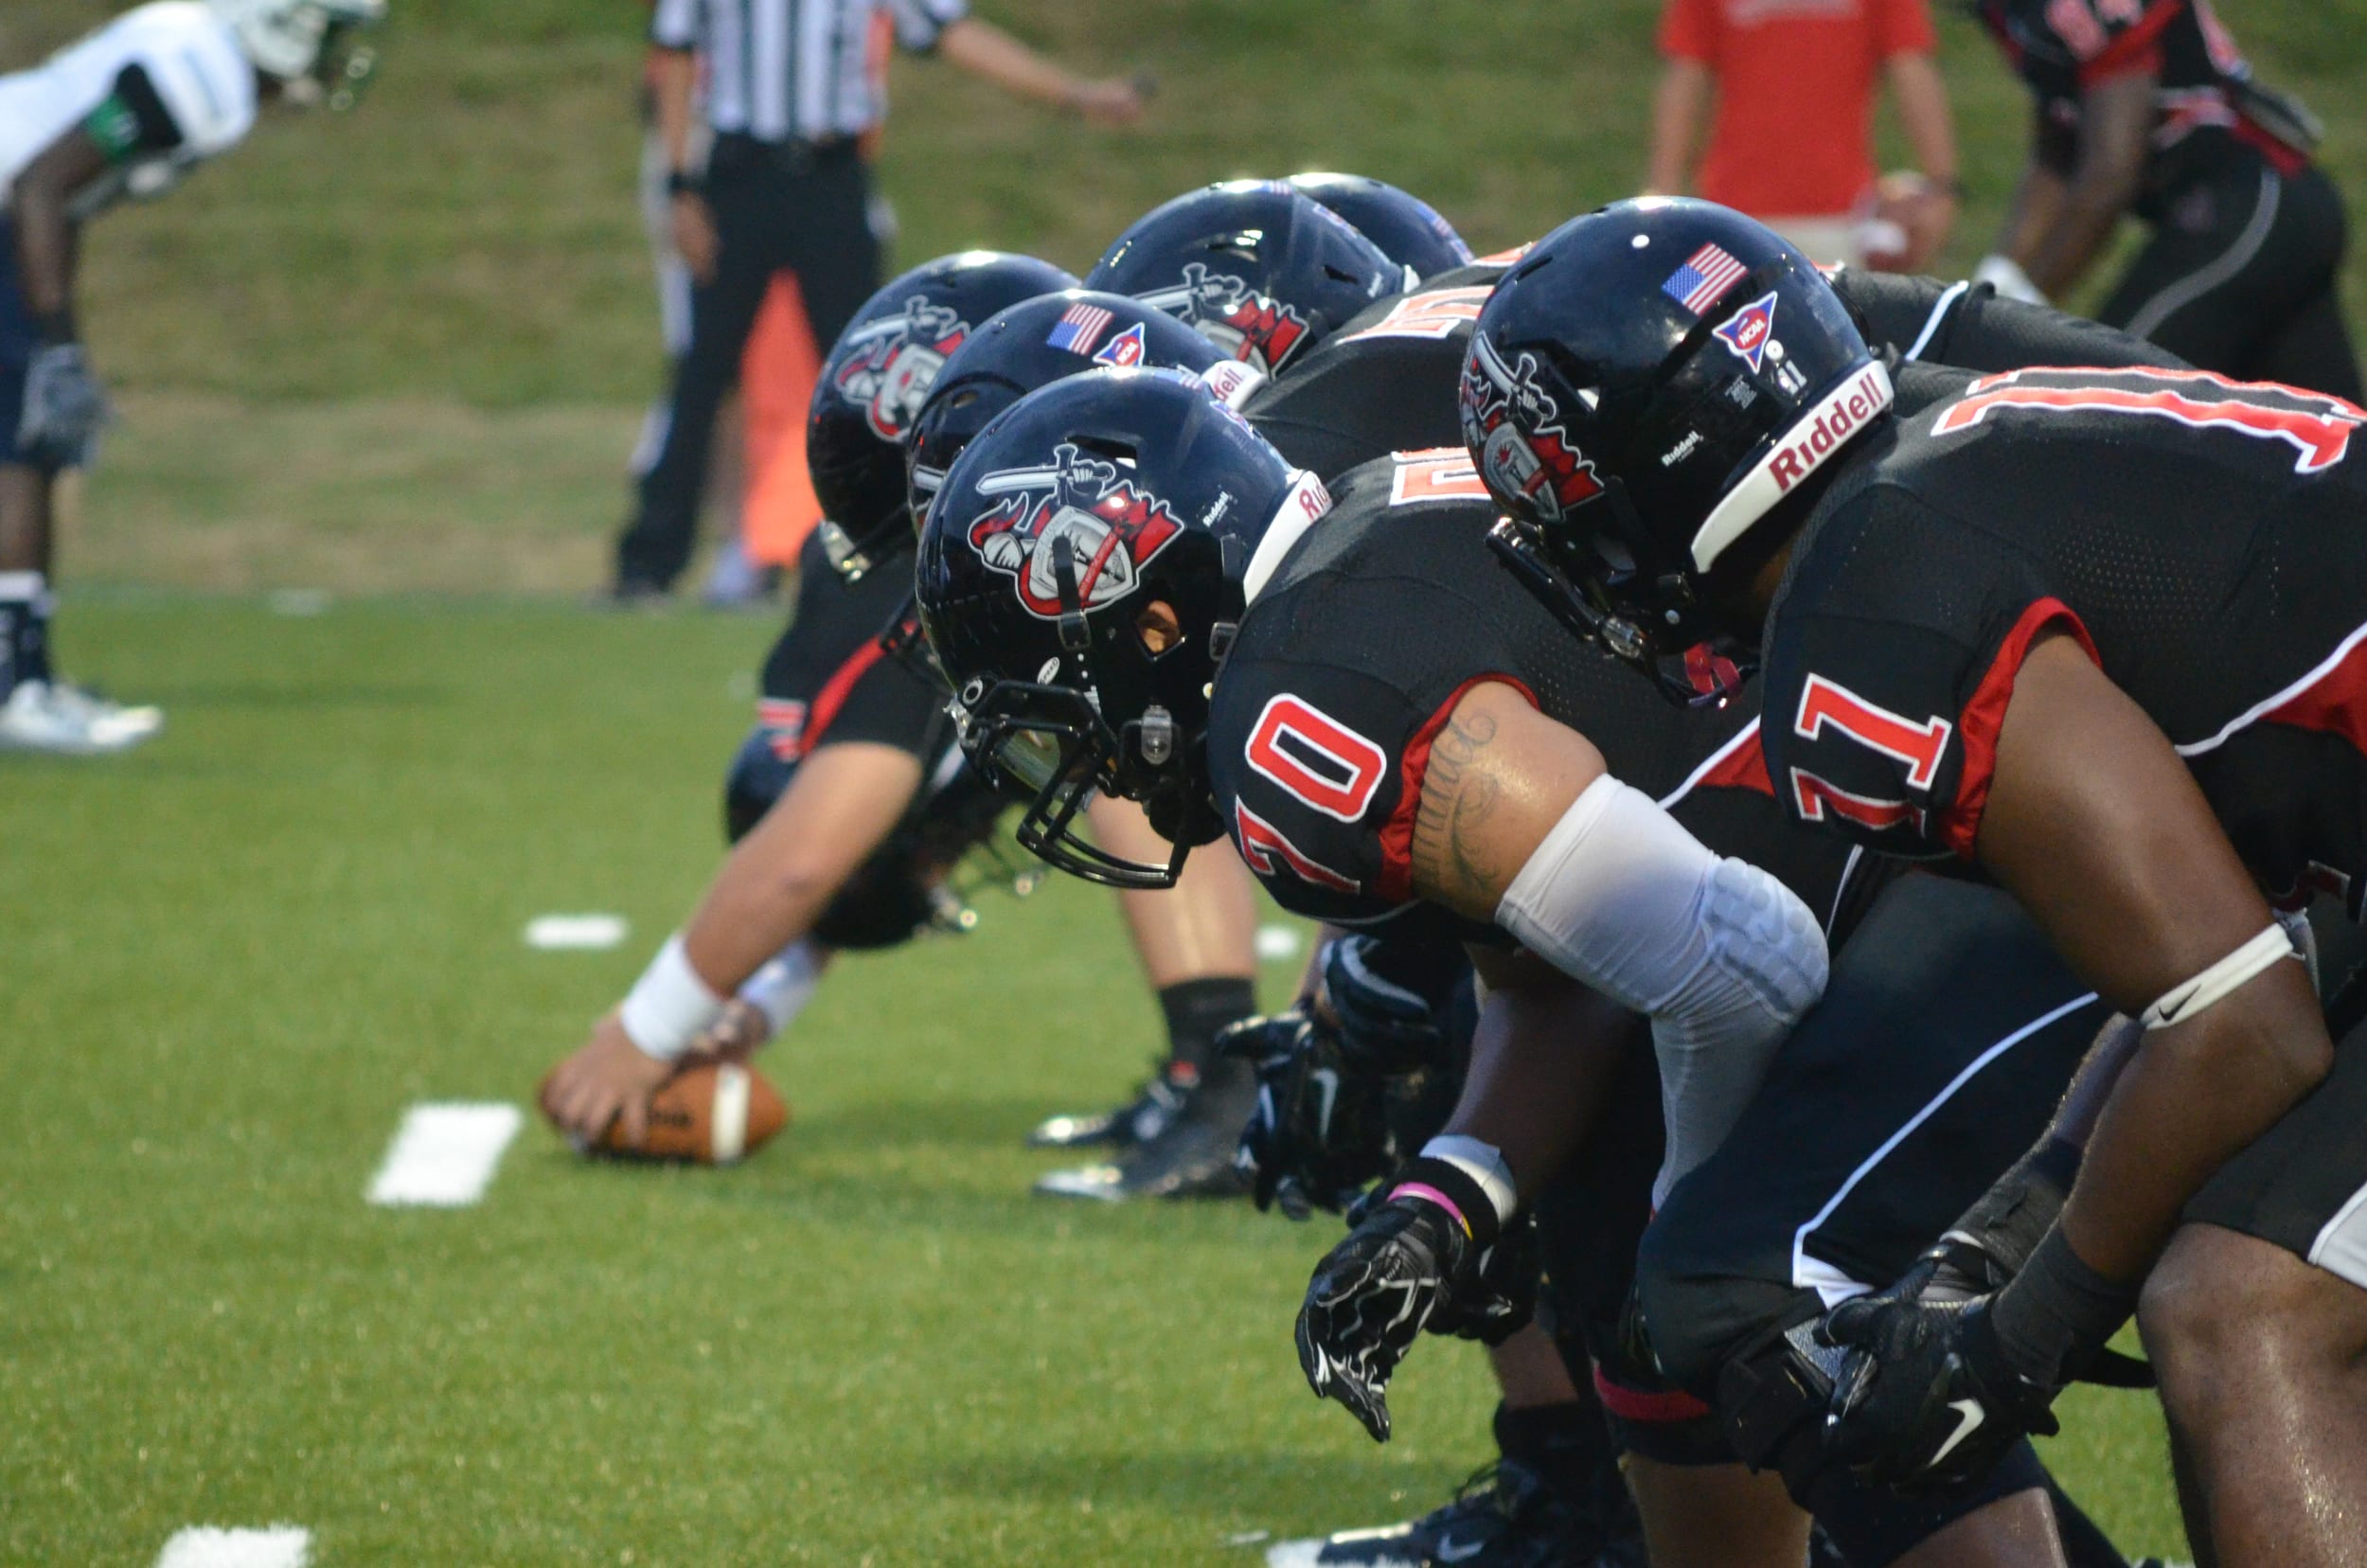 The NGU Crusaders played their first game on the new artificial turf last week.